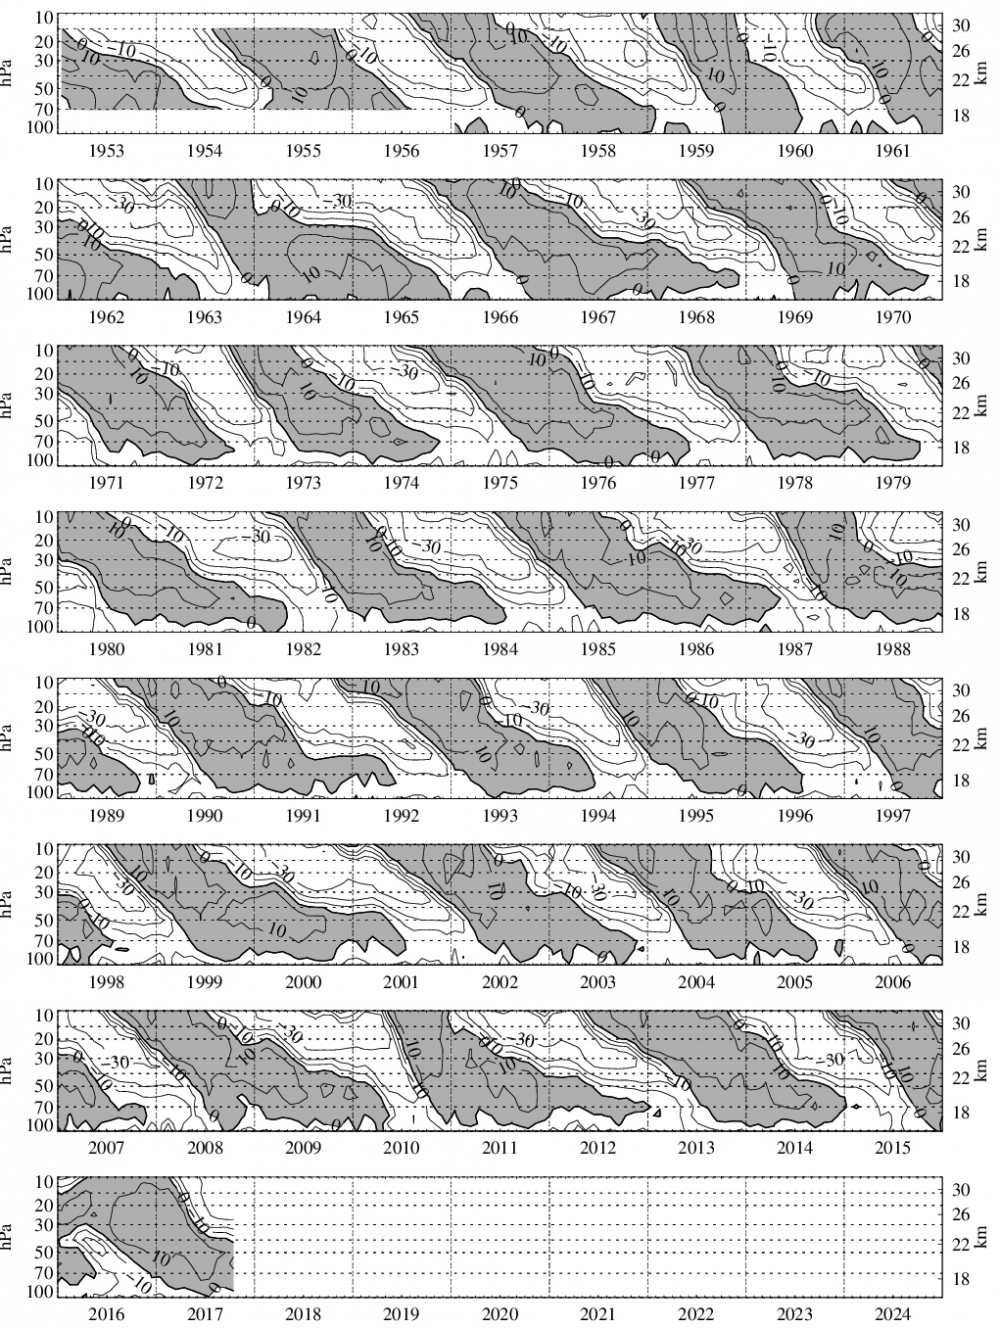 Time-height section of monthly mean zonal winds at equatorial stations. Westerlies are shaded. (Updated from Naujokat, 1986)